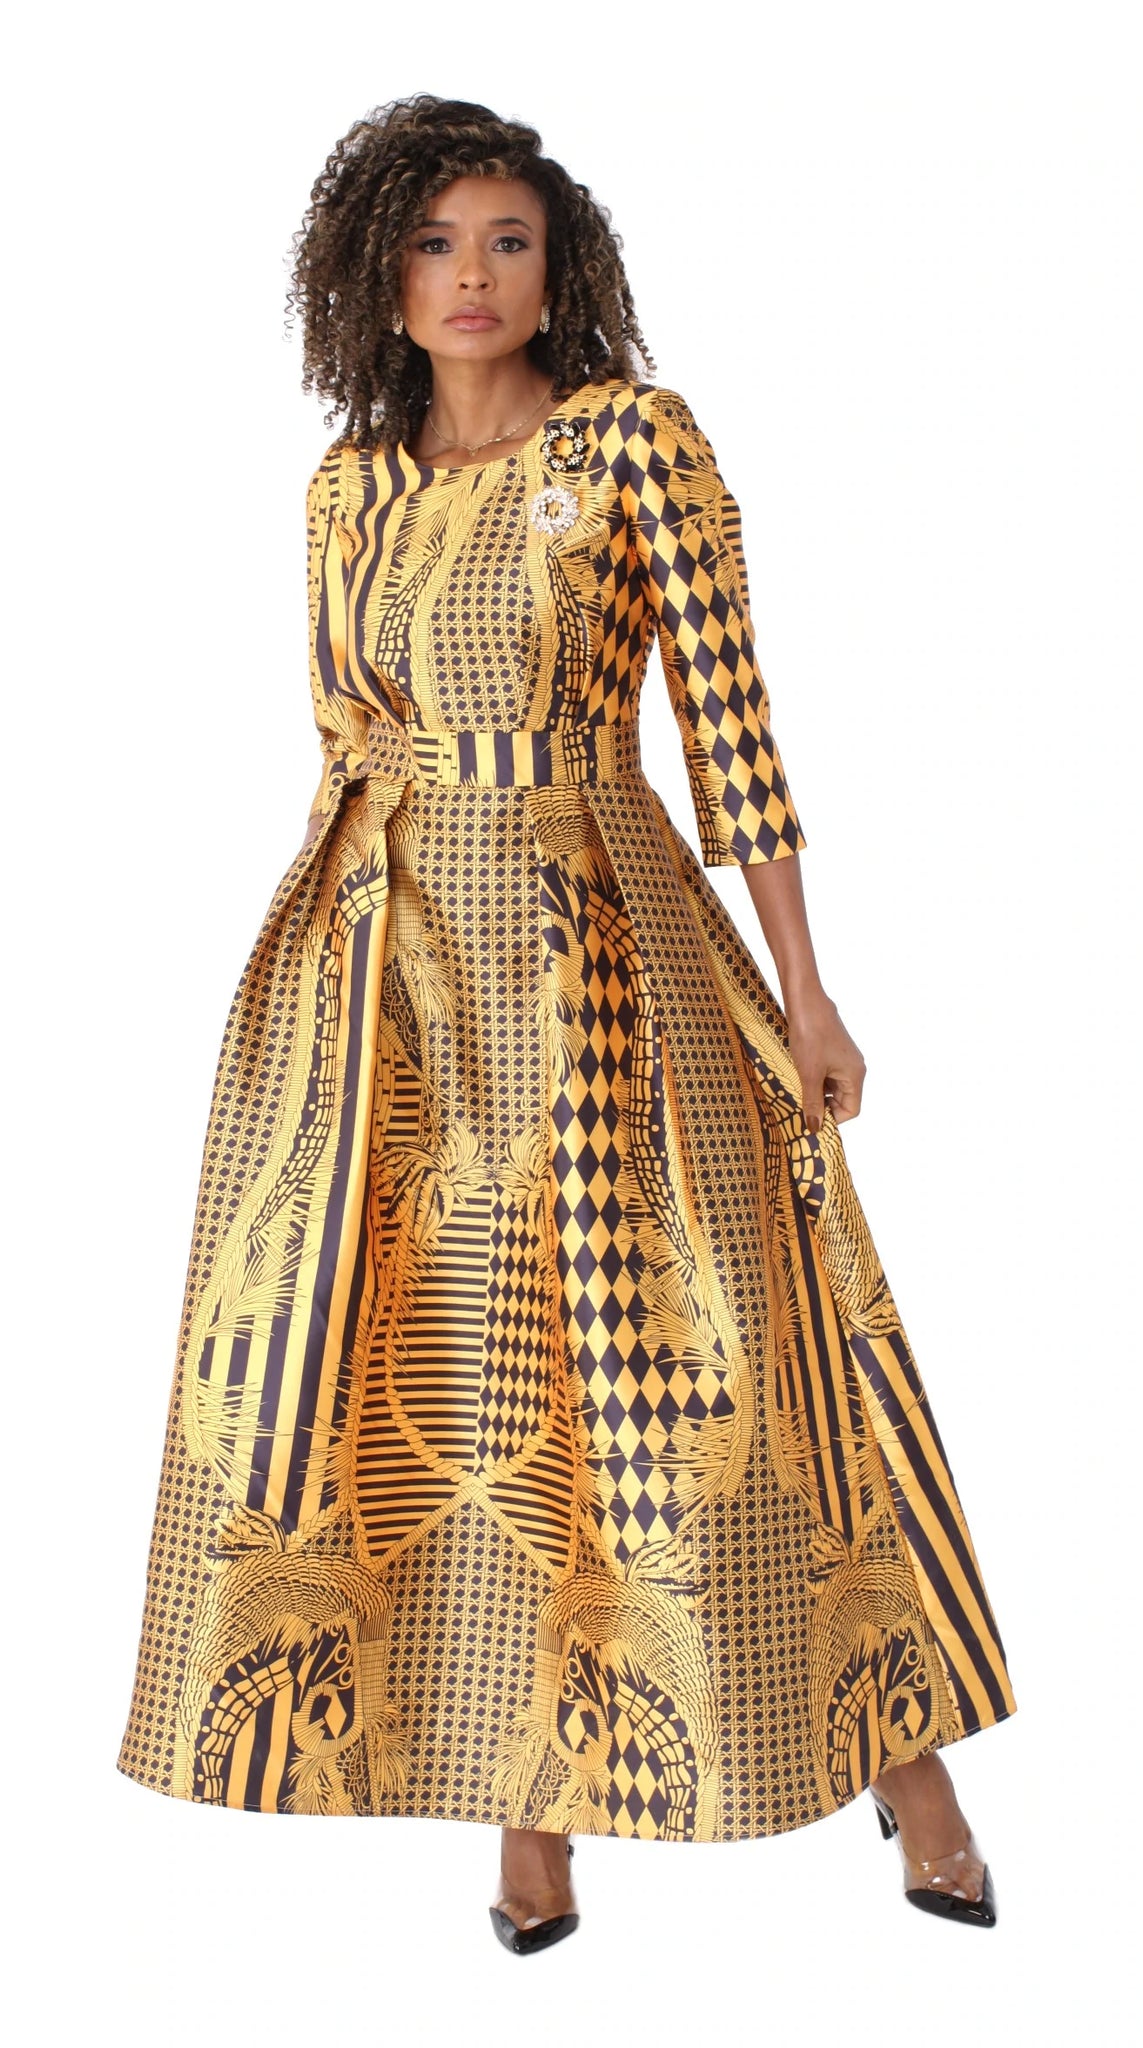 Tally Taylor Church Dress 4497C-Black/Gold - Church Suits For Less